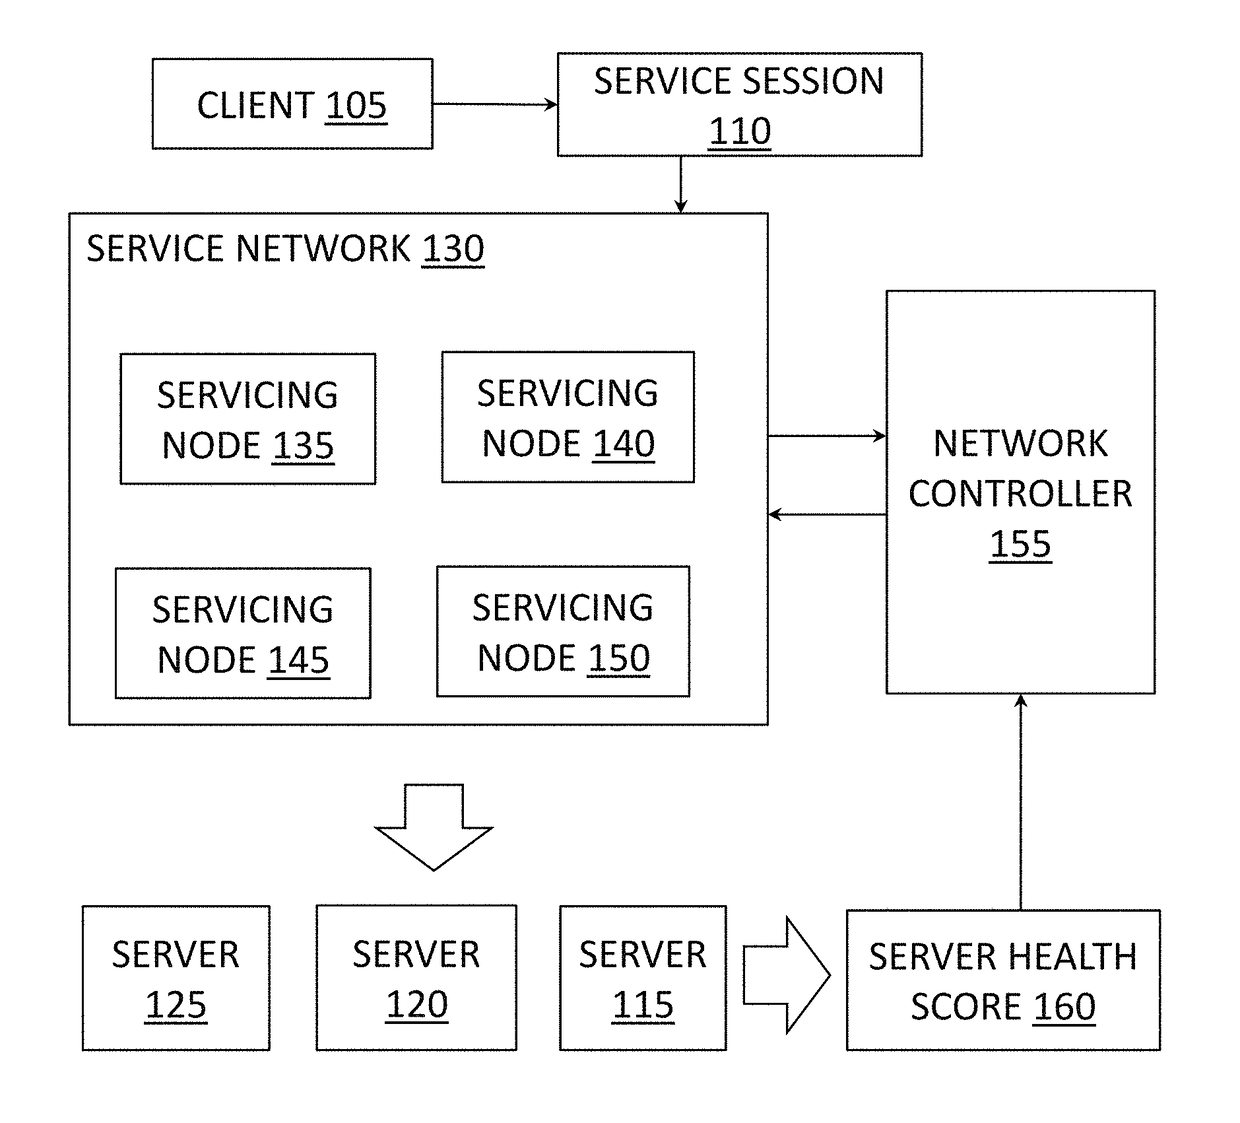 Distributed system to determine a server's health